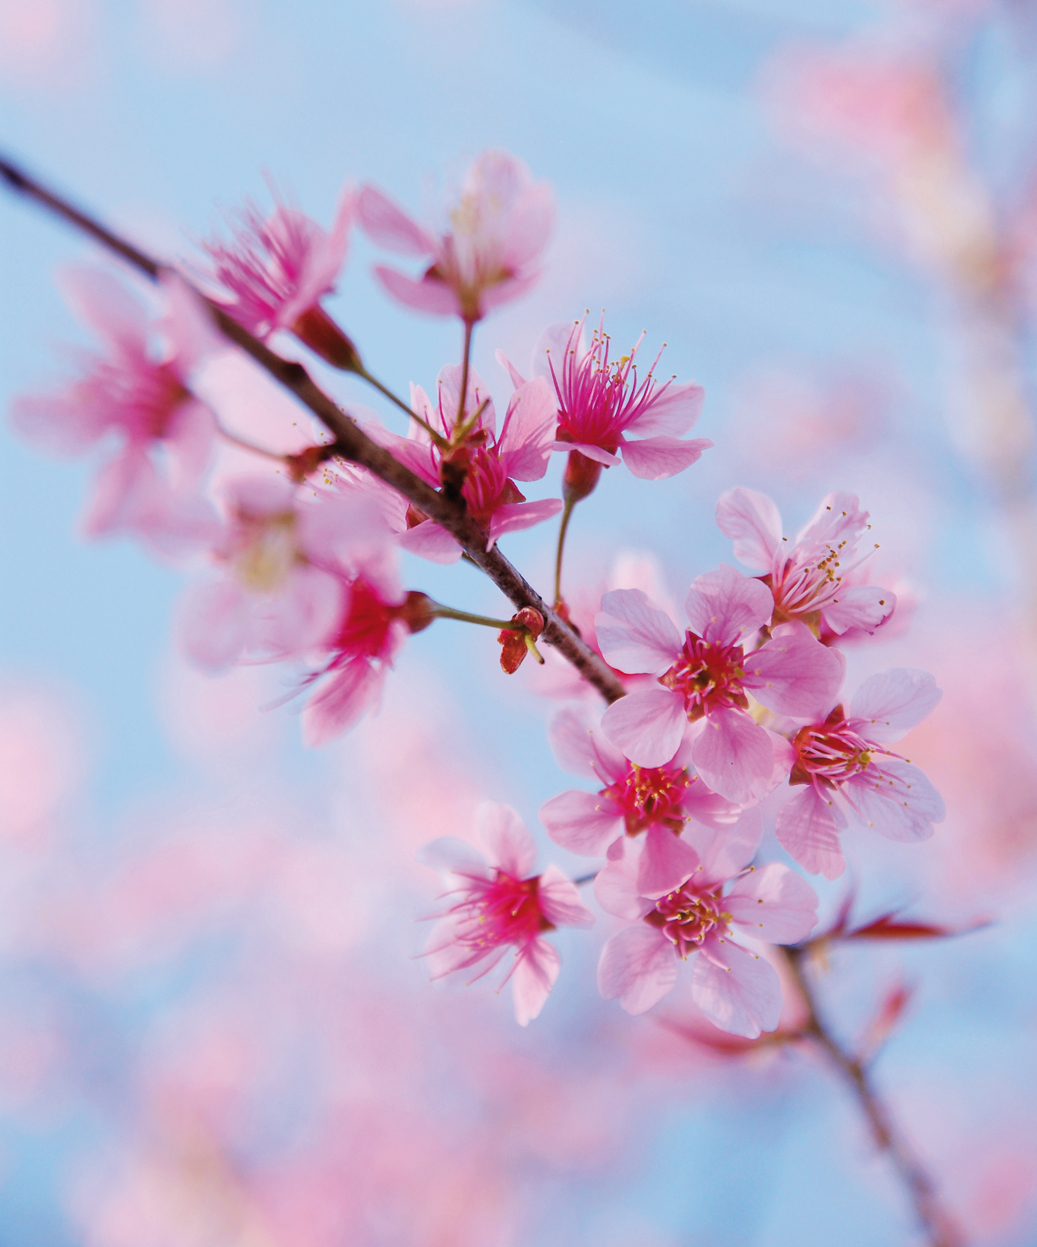 A branch full of pink blossom